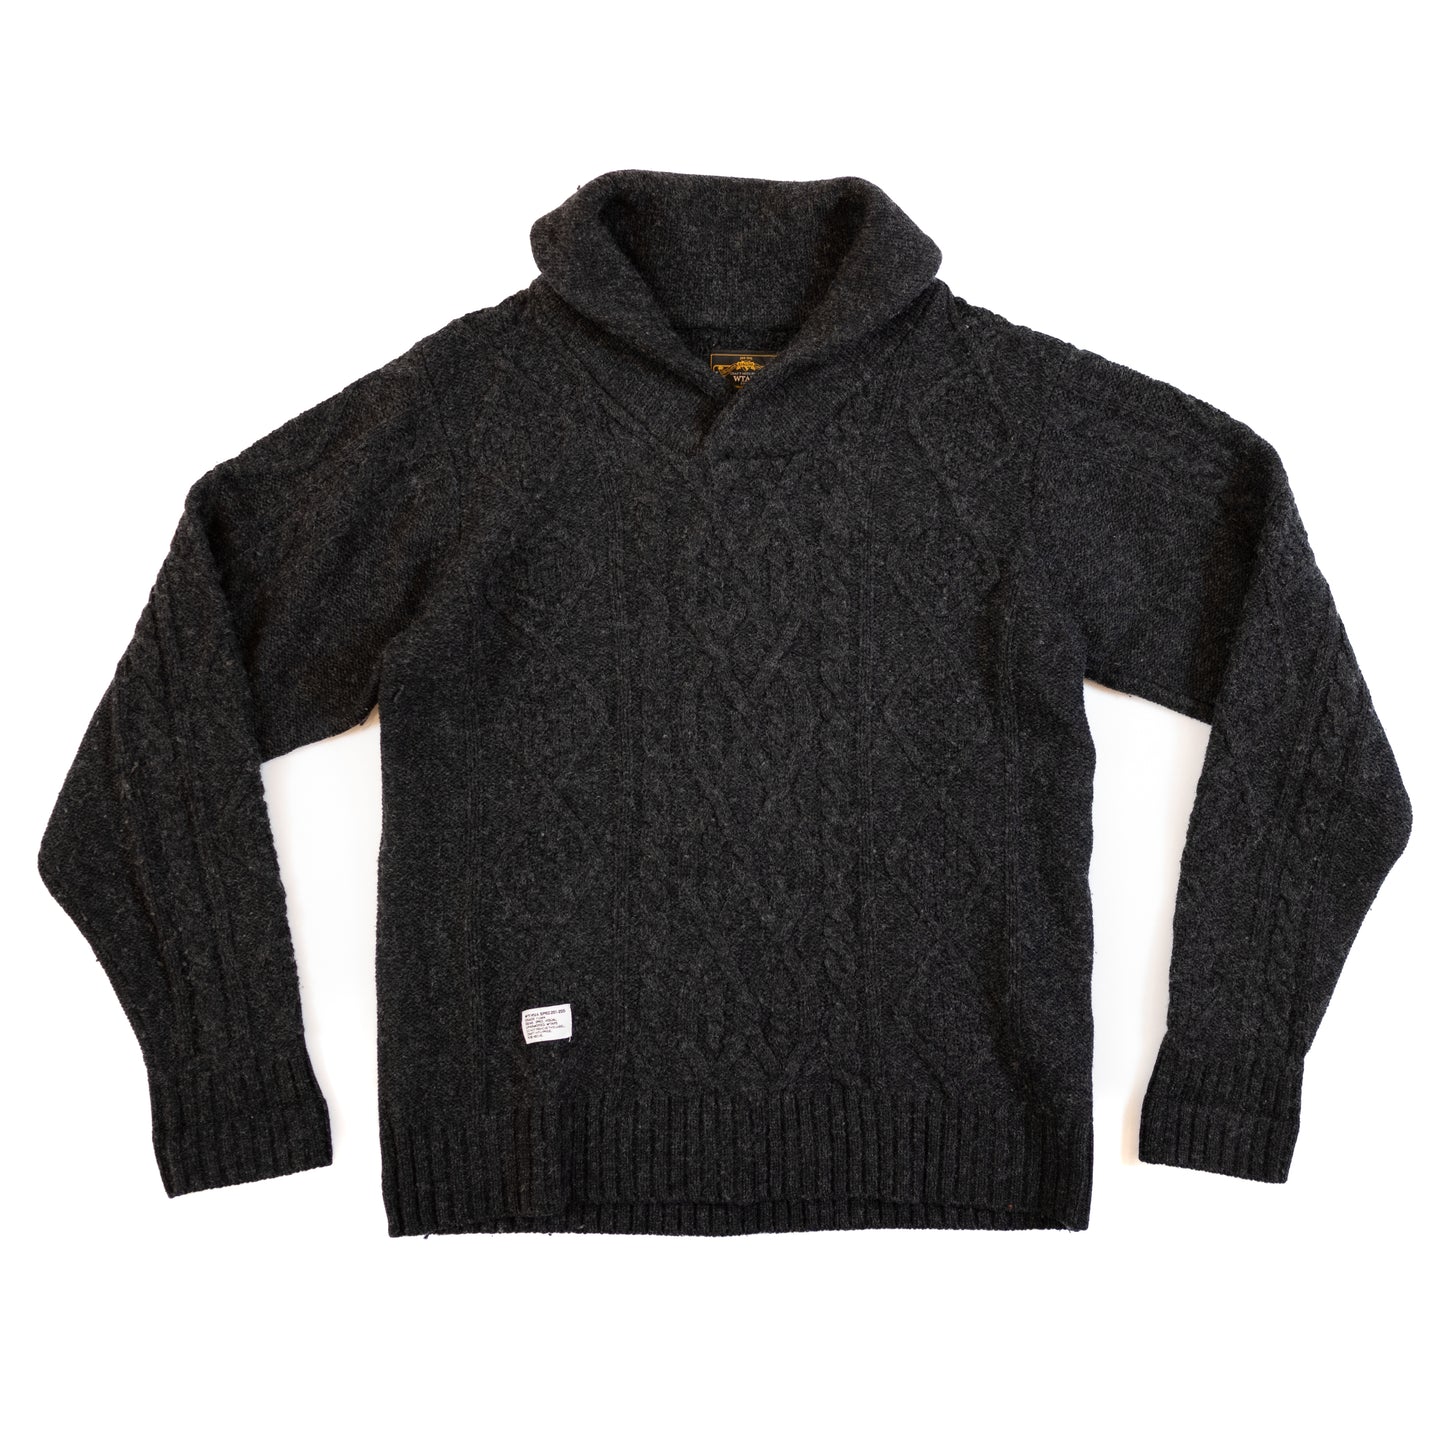 Wtaps Nordic Knit Sweater (2009AW)